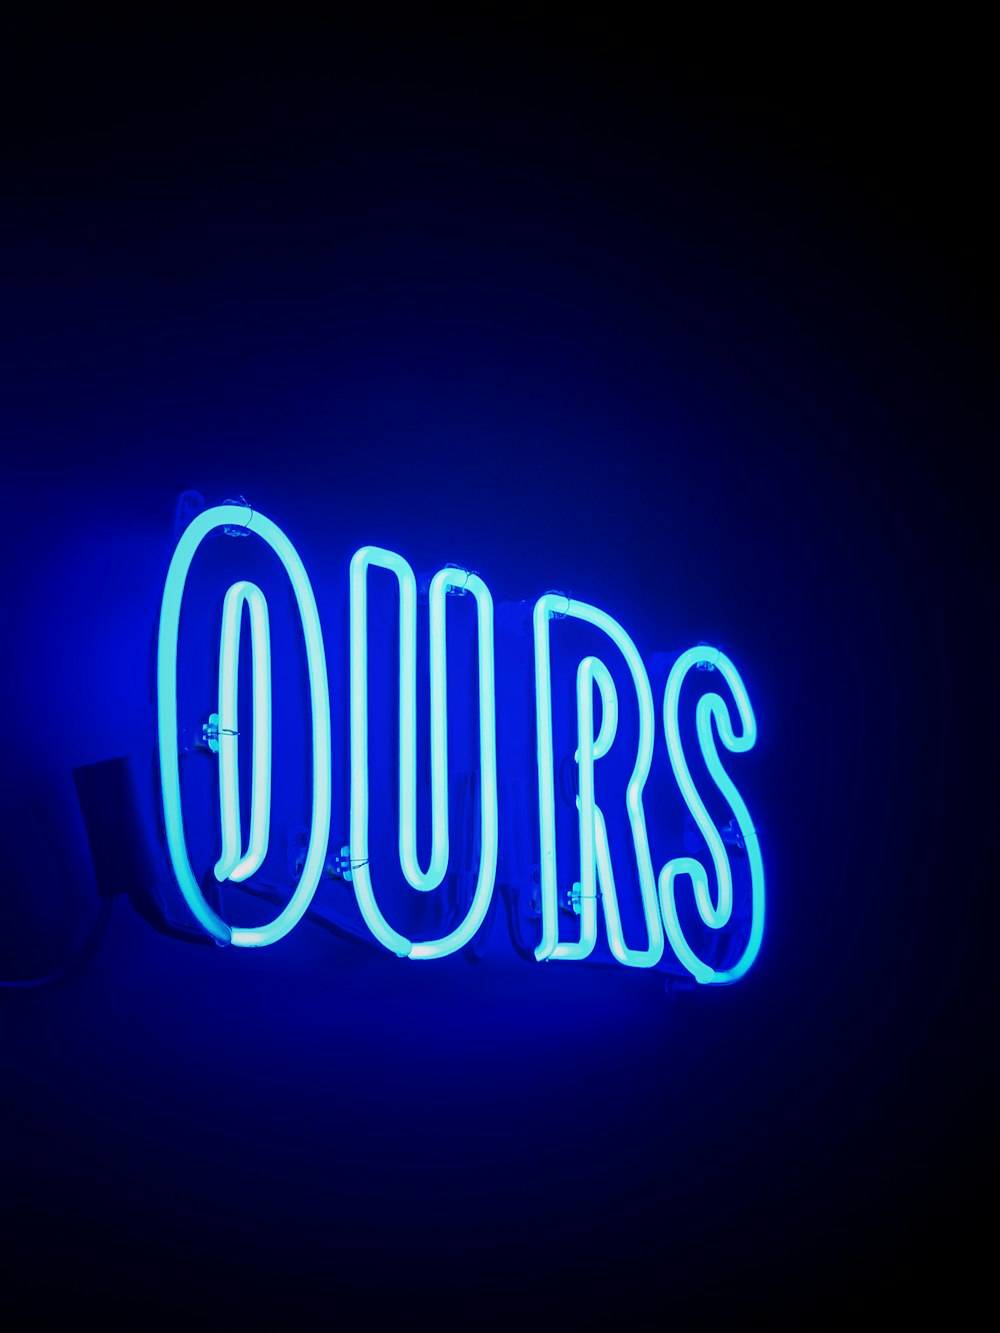 blue ours text neon light signage